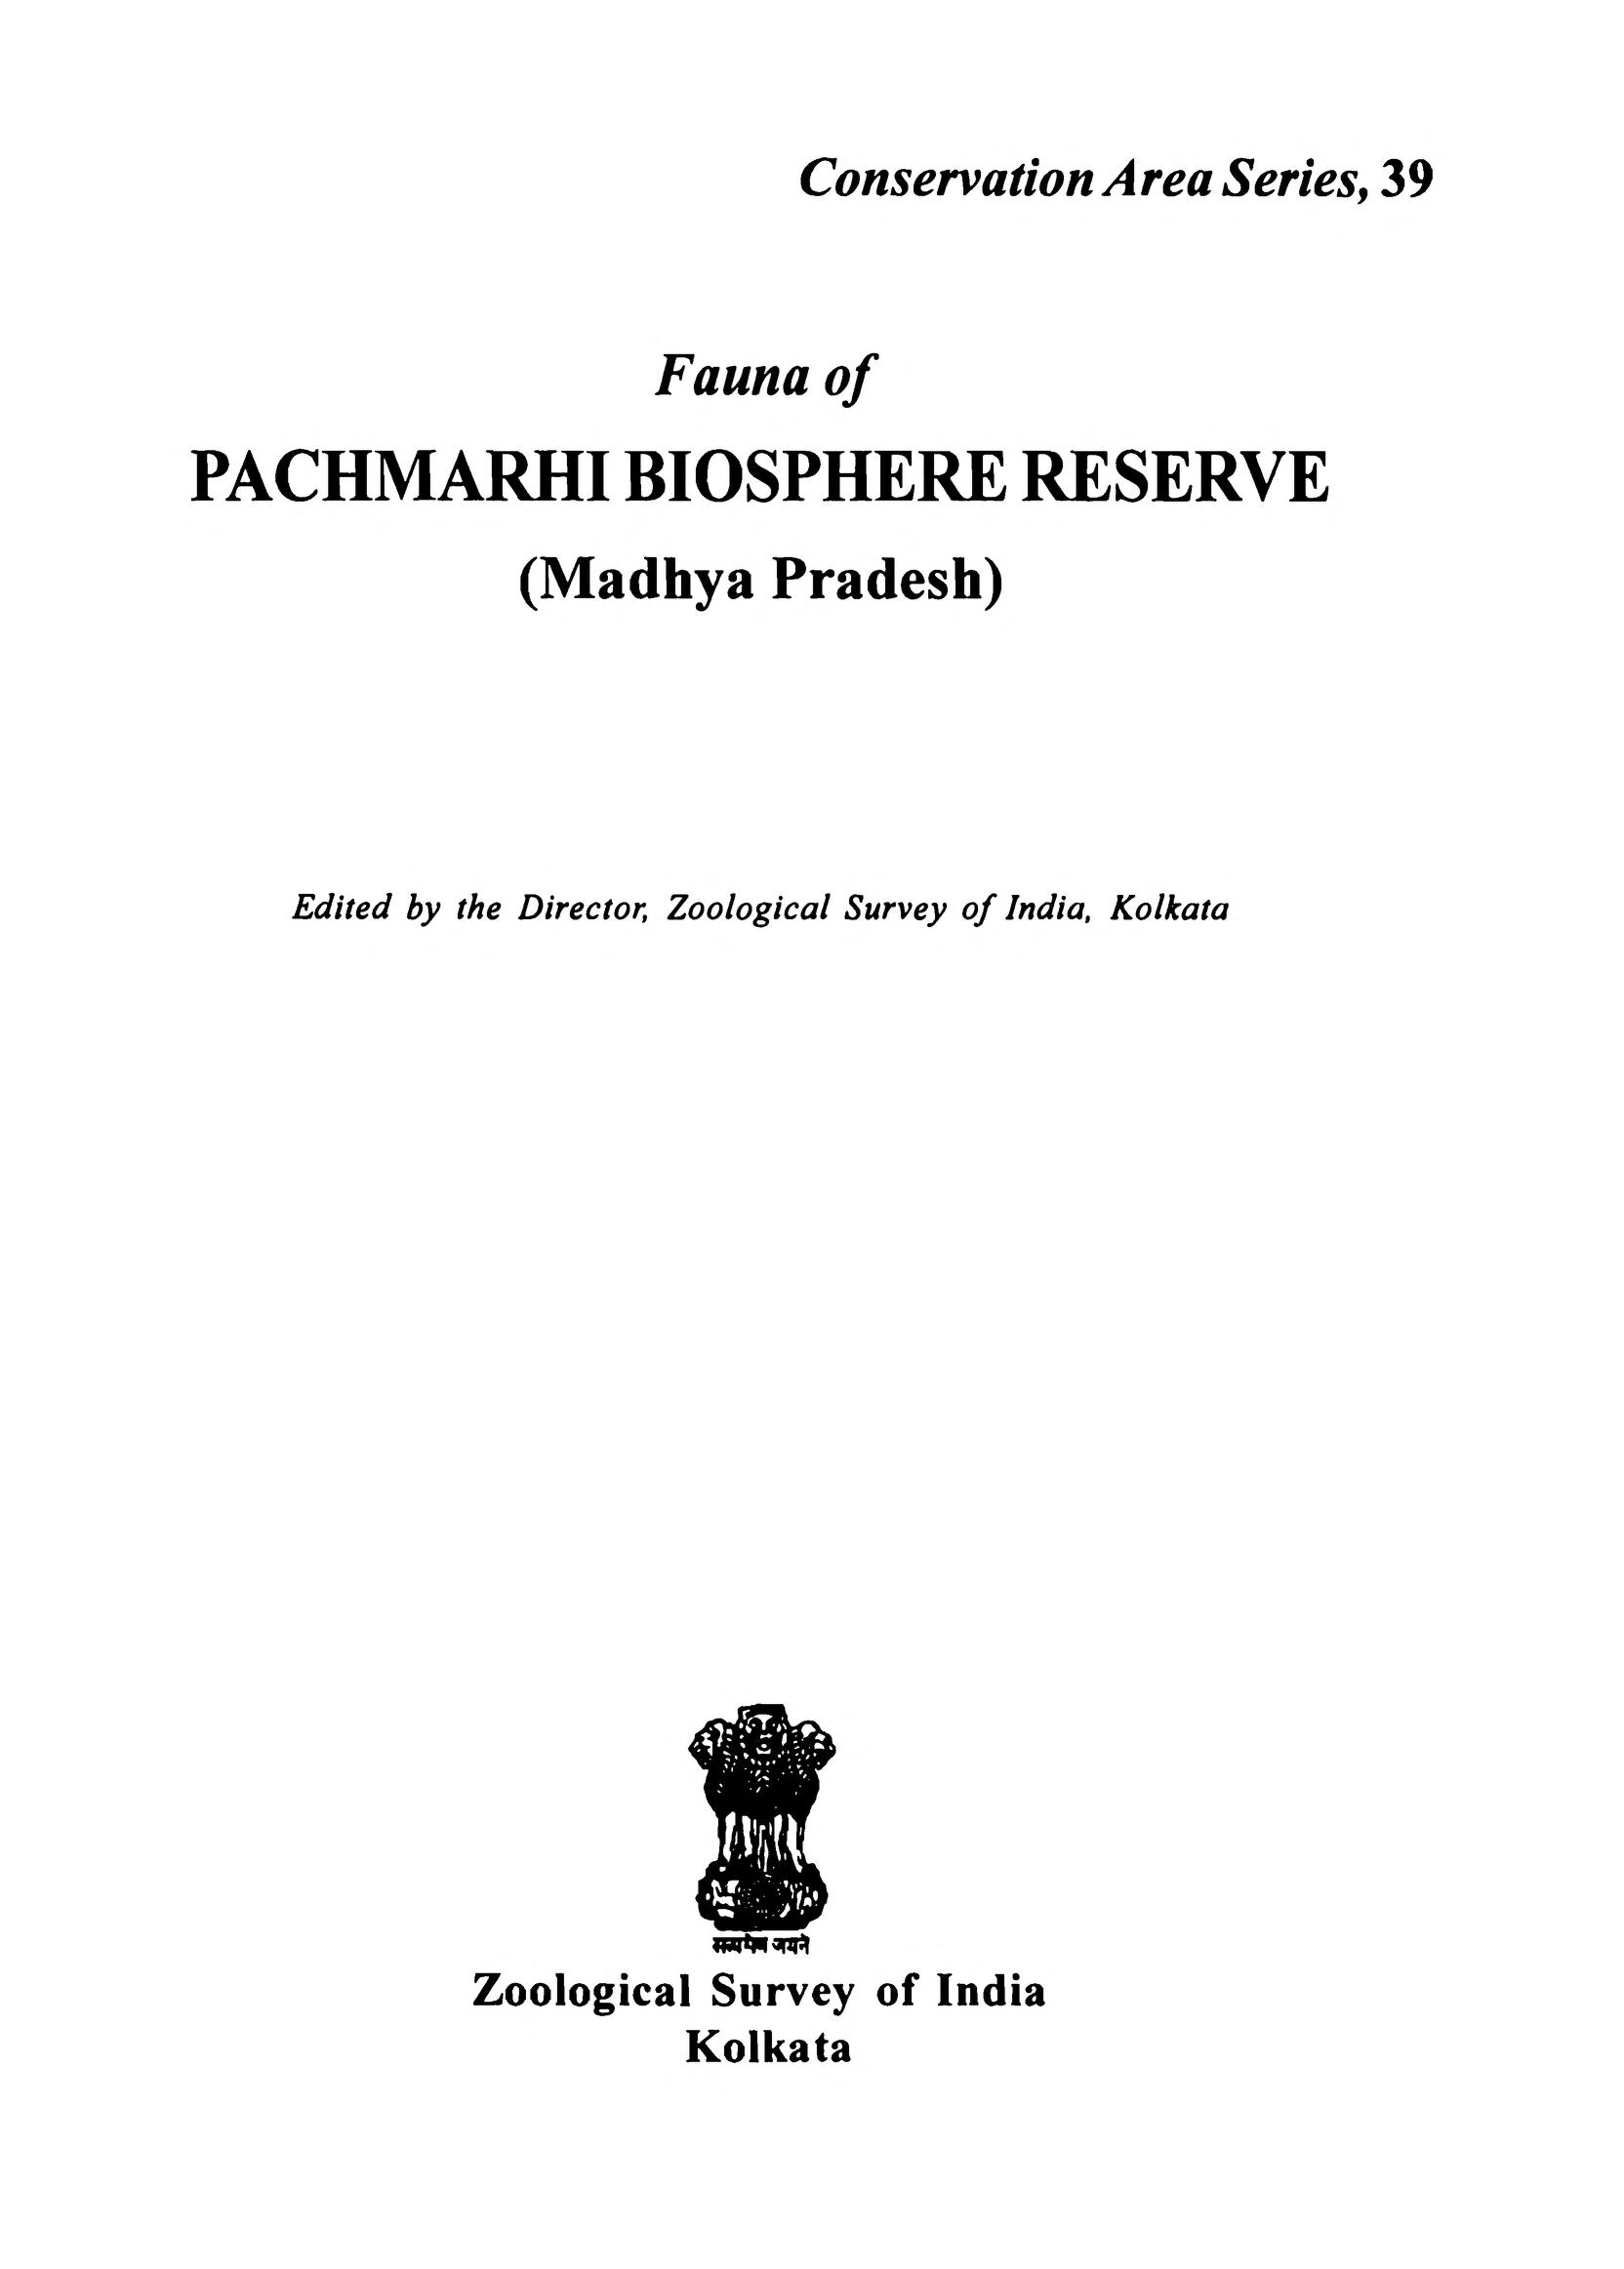 Fauna of Pachmarhi Biosphere Reserve (Madhya Pradesh) : Free Download,  Borrow, and Streaming : Internet Archive